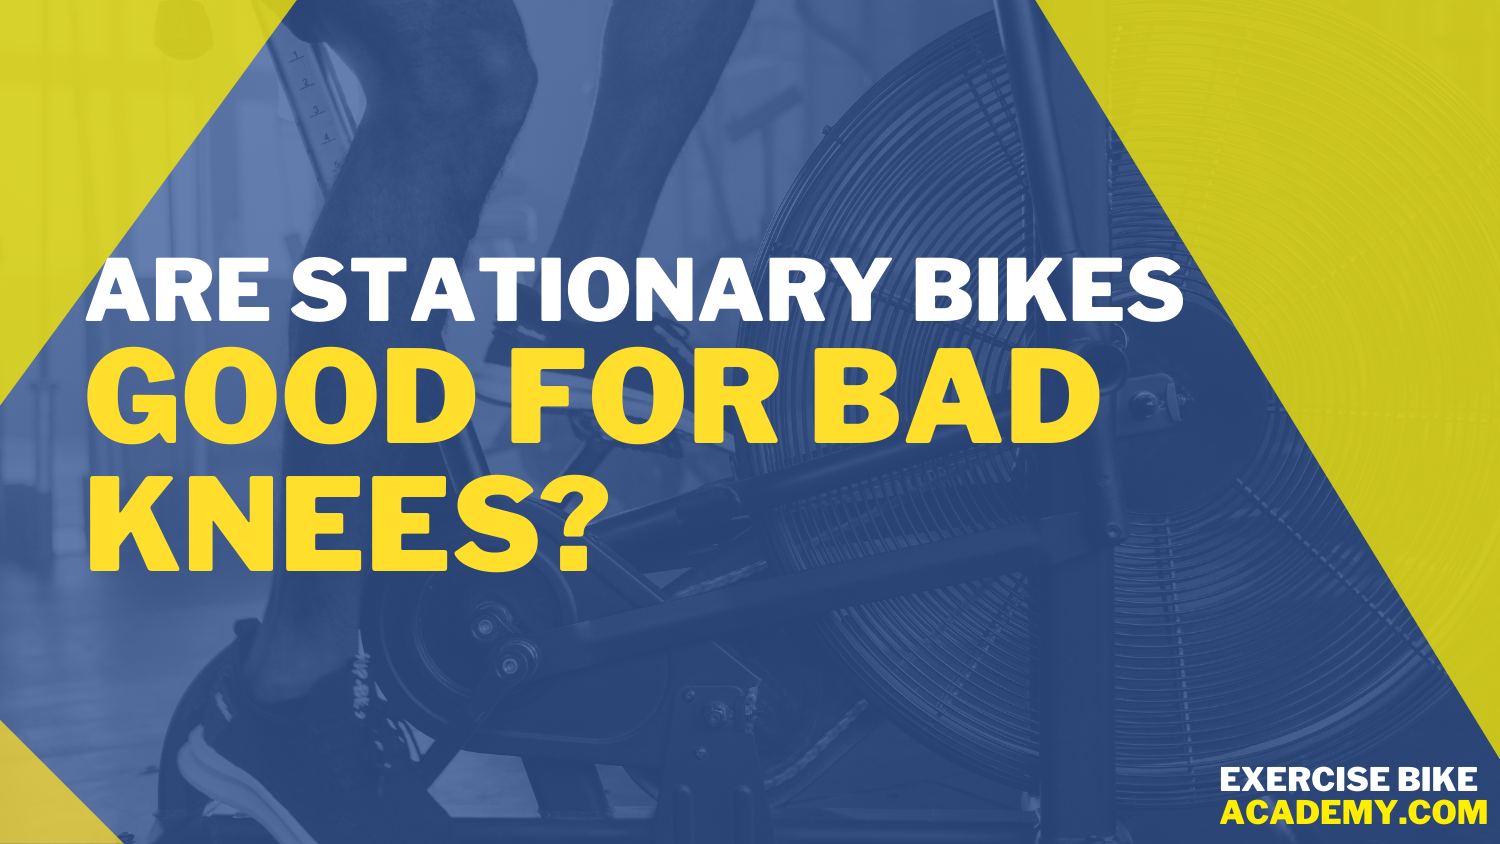 Are stationary bikes good for bad knees